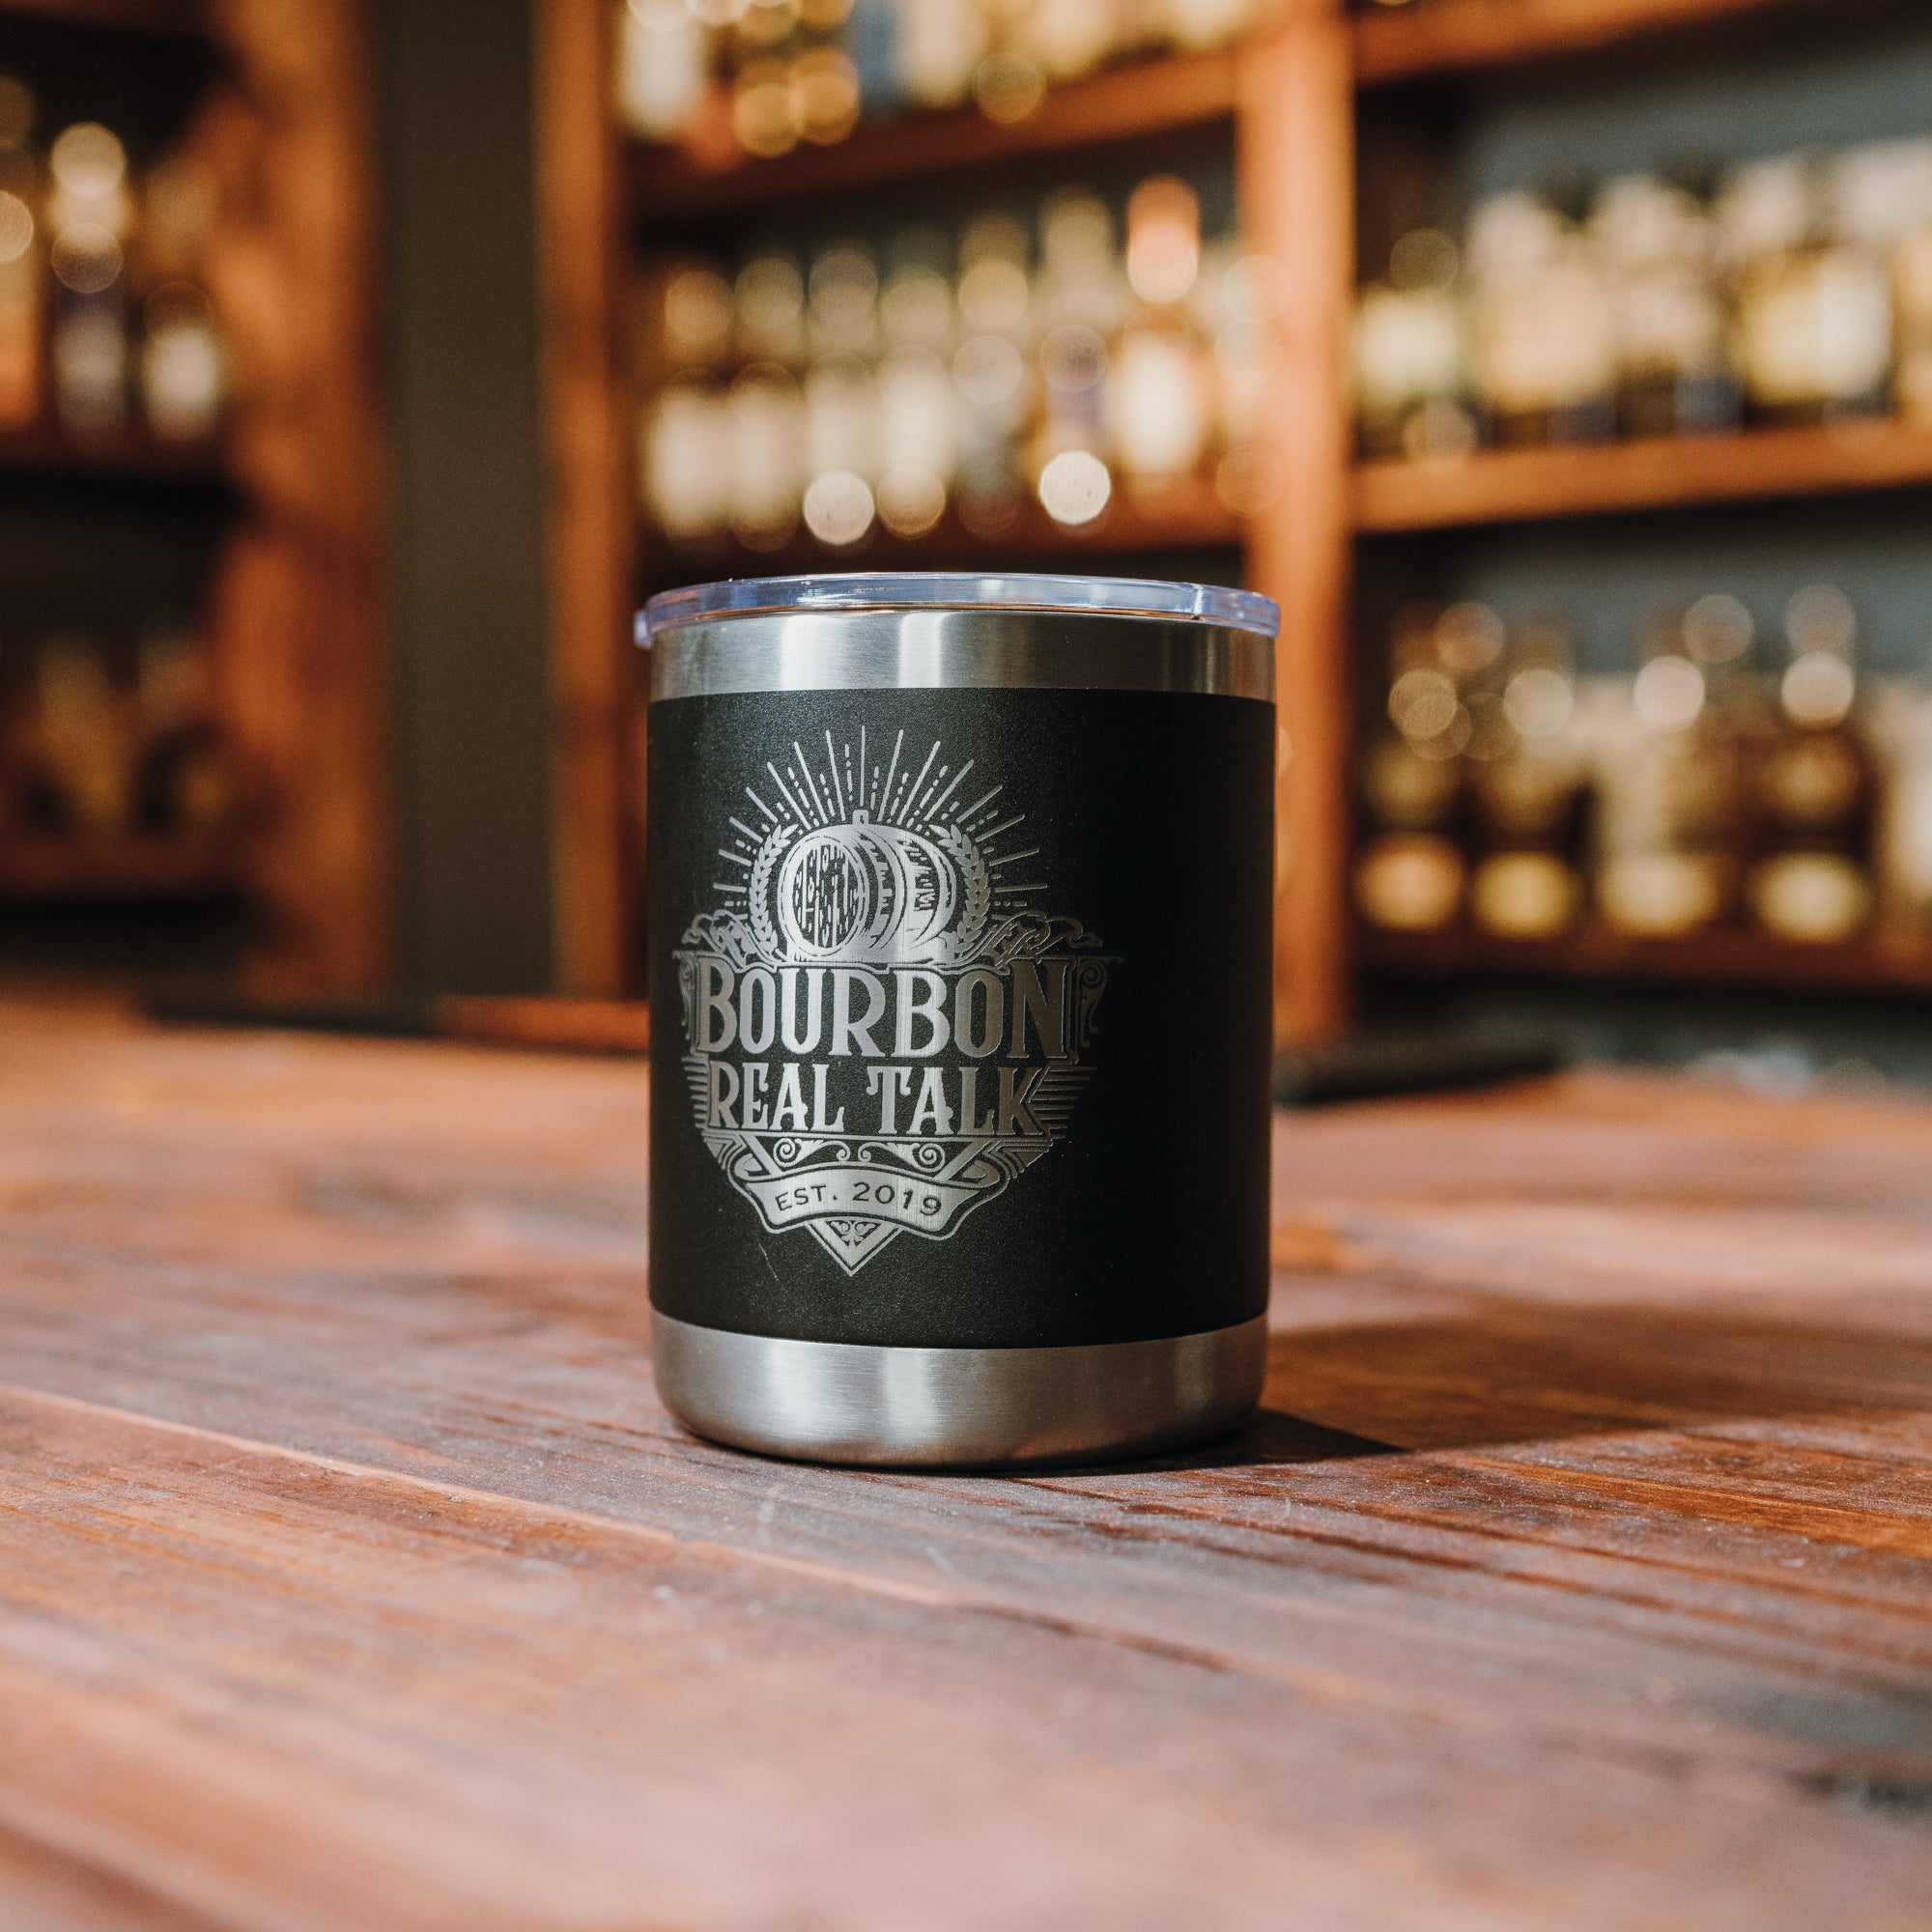 Bourbon, Not Just For Boys Insulated Tumbler